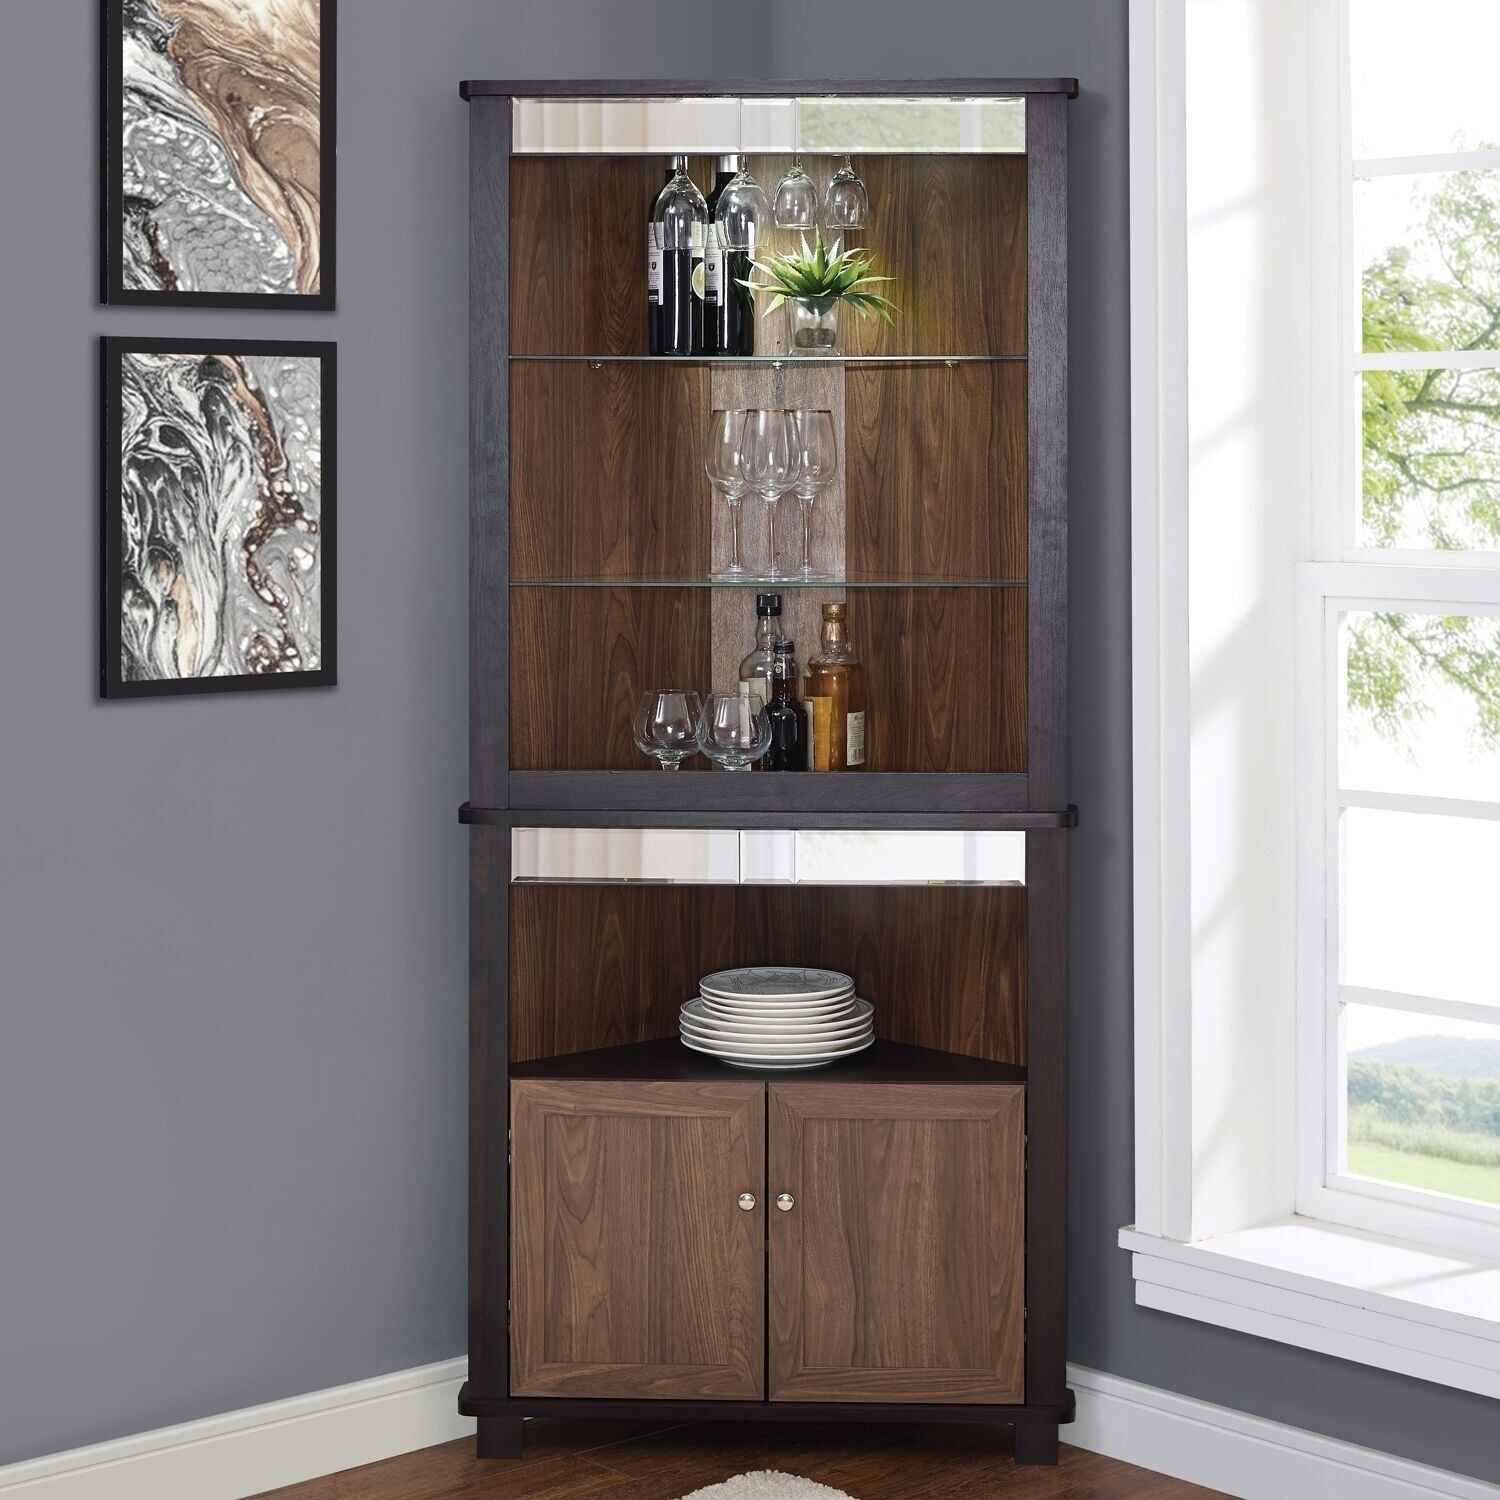 Home Source Arms Espresso Corner Bar Unit Na Includes intended for sizing 1500 X 1500